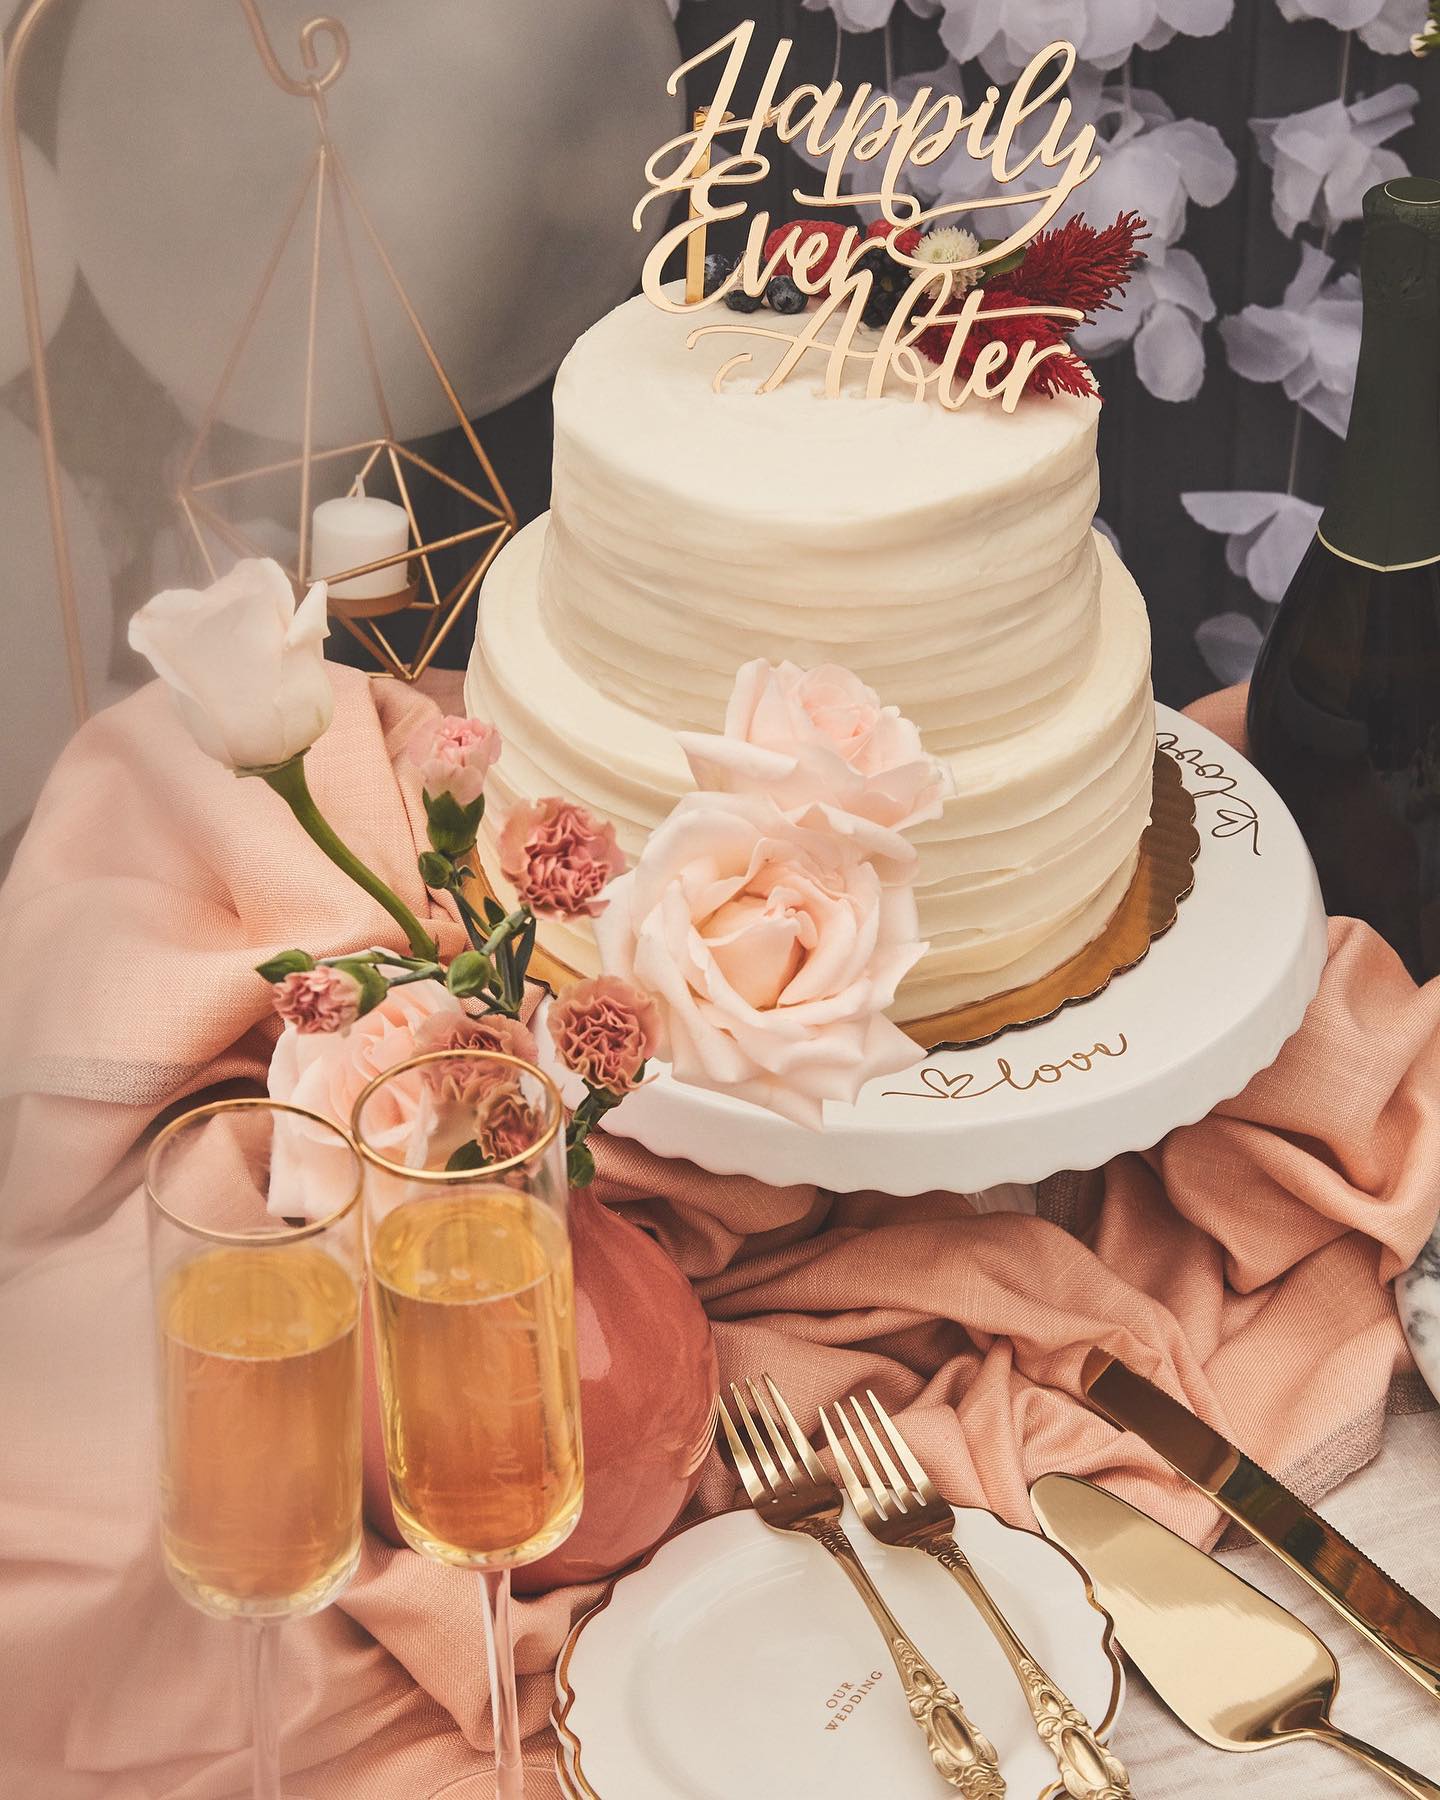 wedding cakes, champagne flutes, and dessert table setup